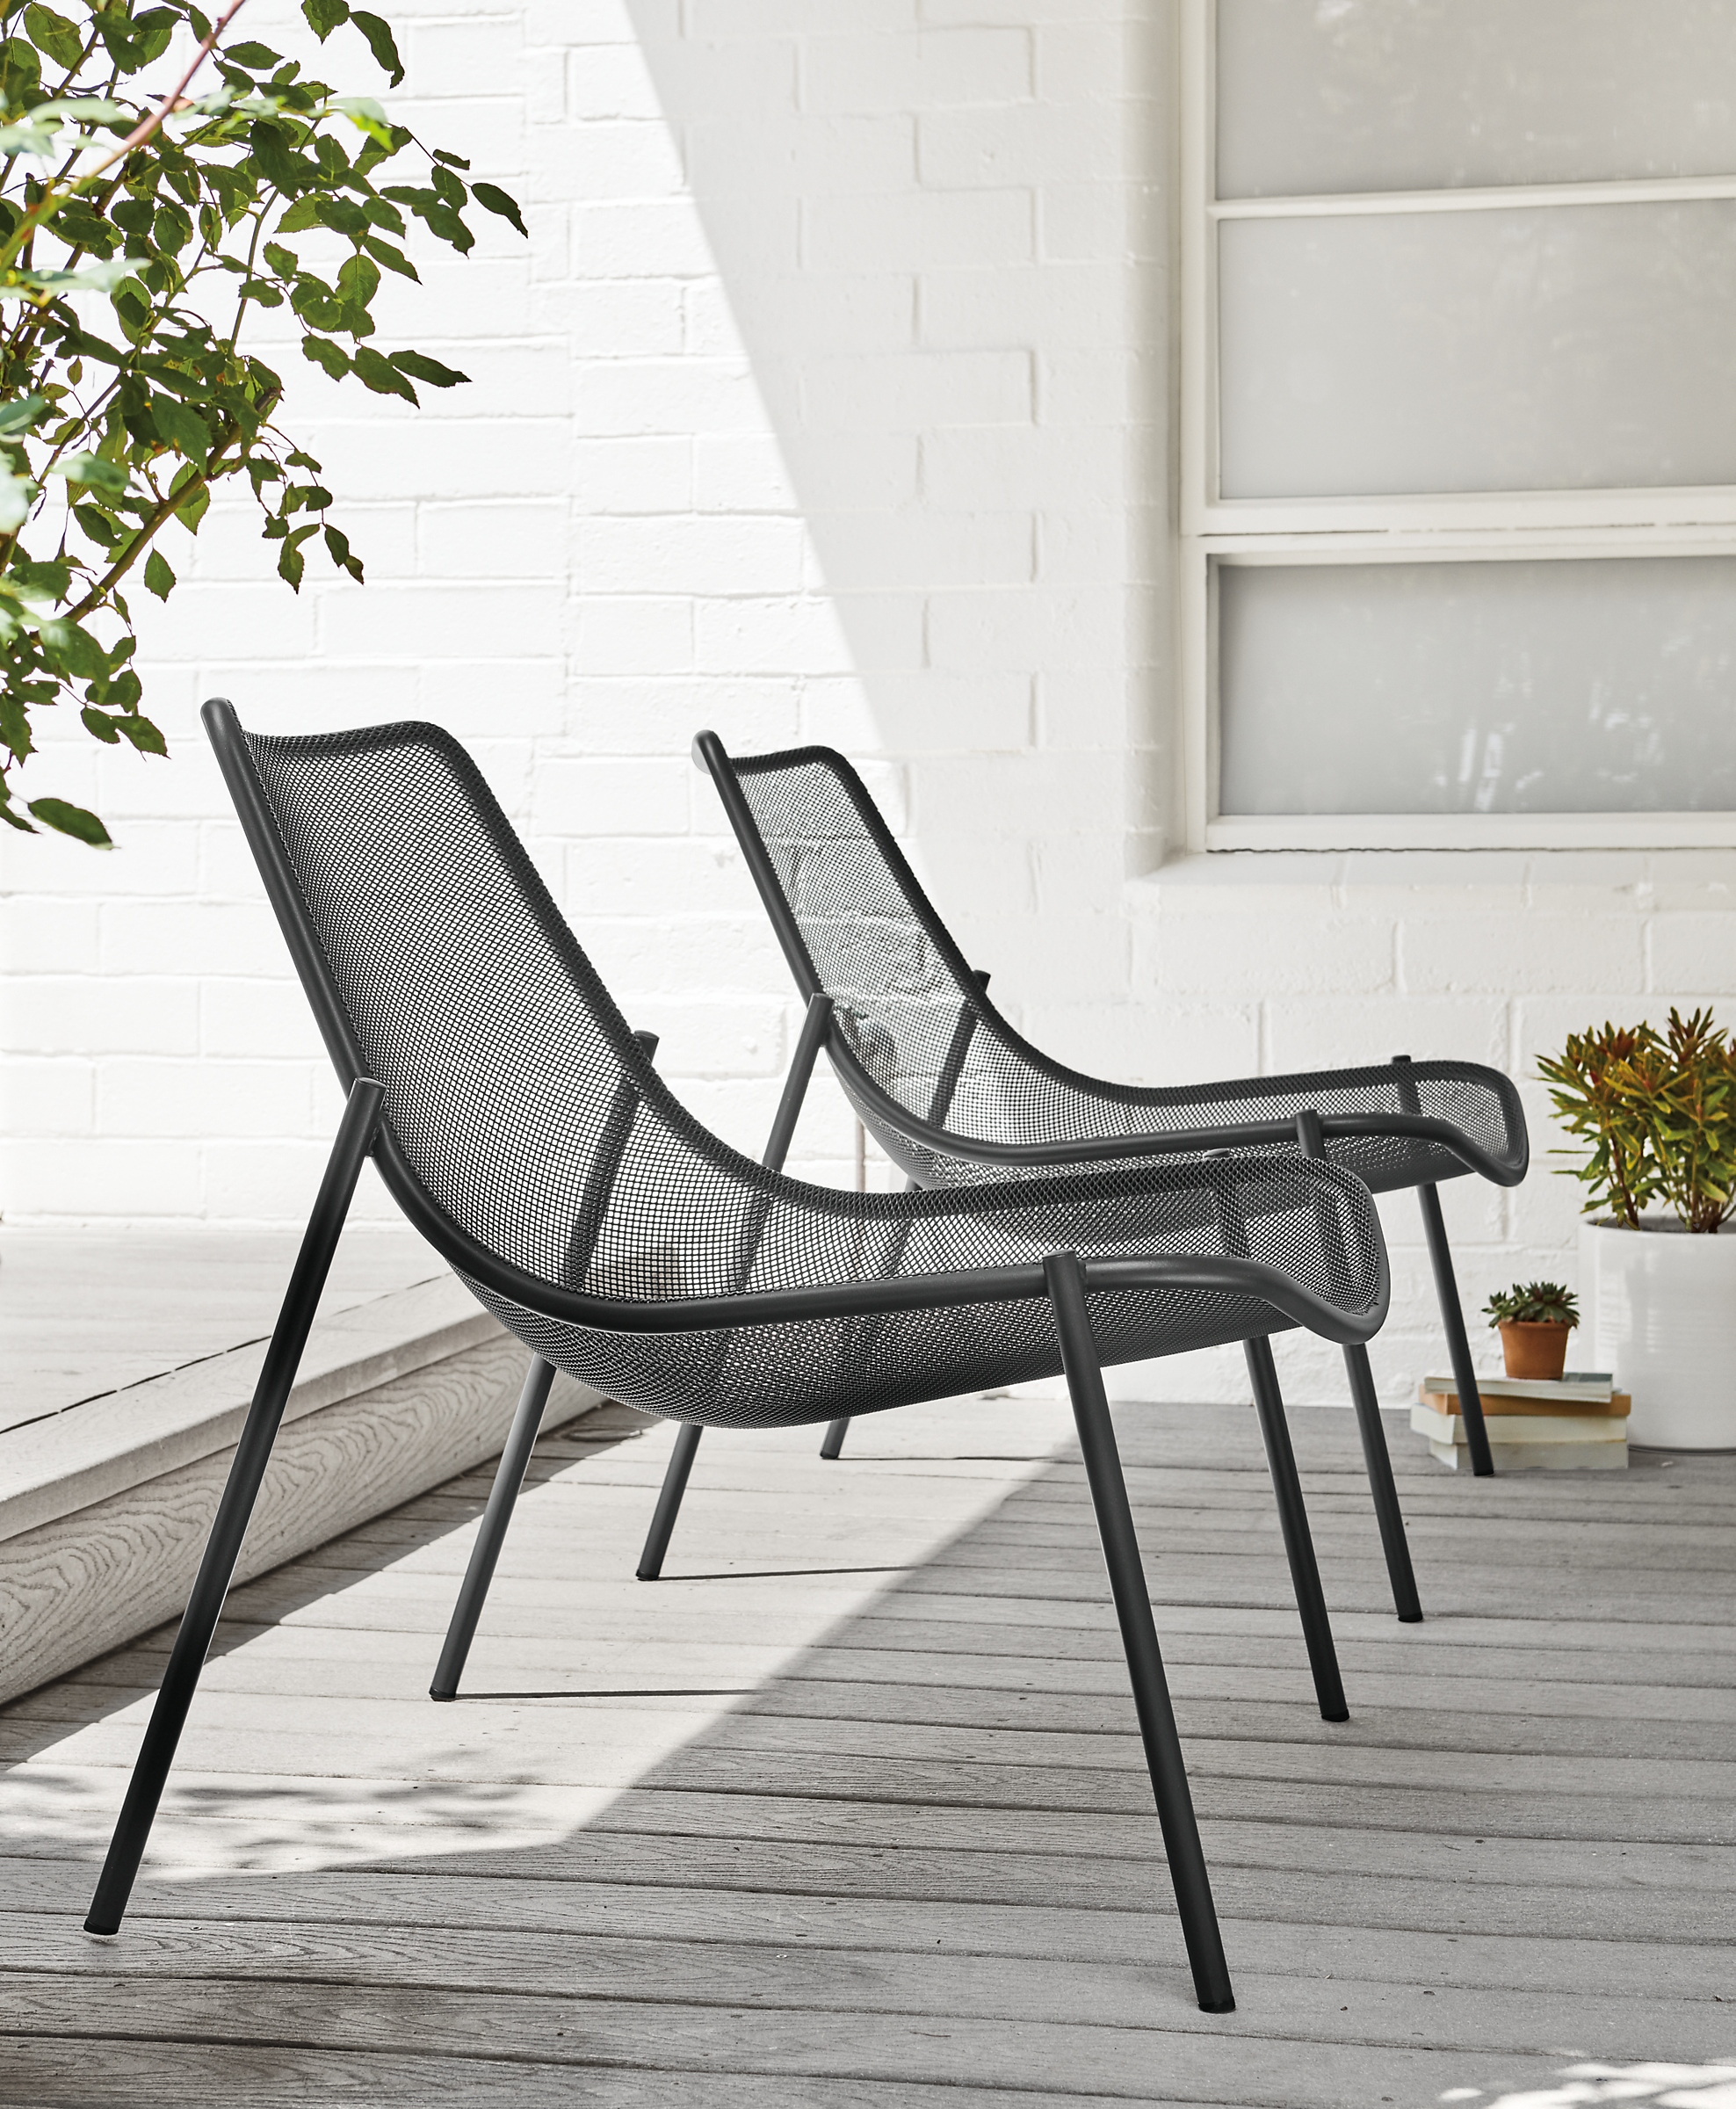 Detail of Soleil lounge chairs in graphite.